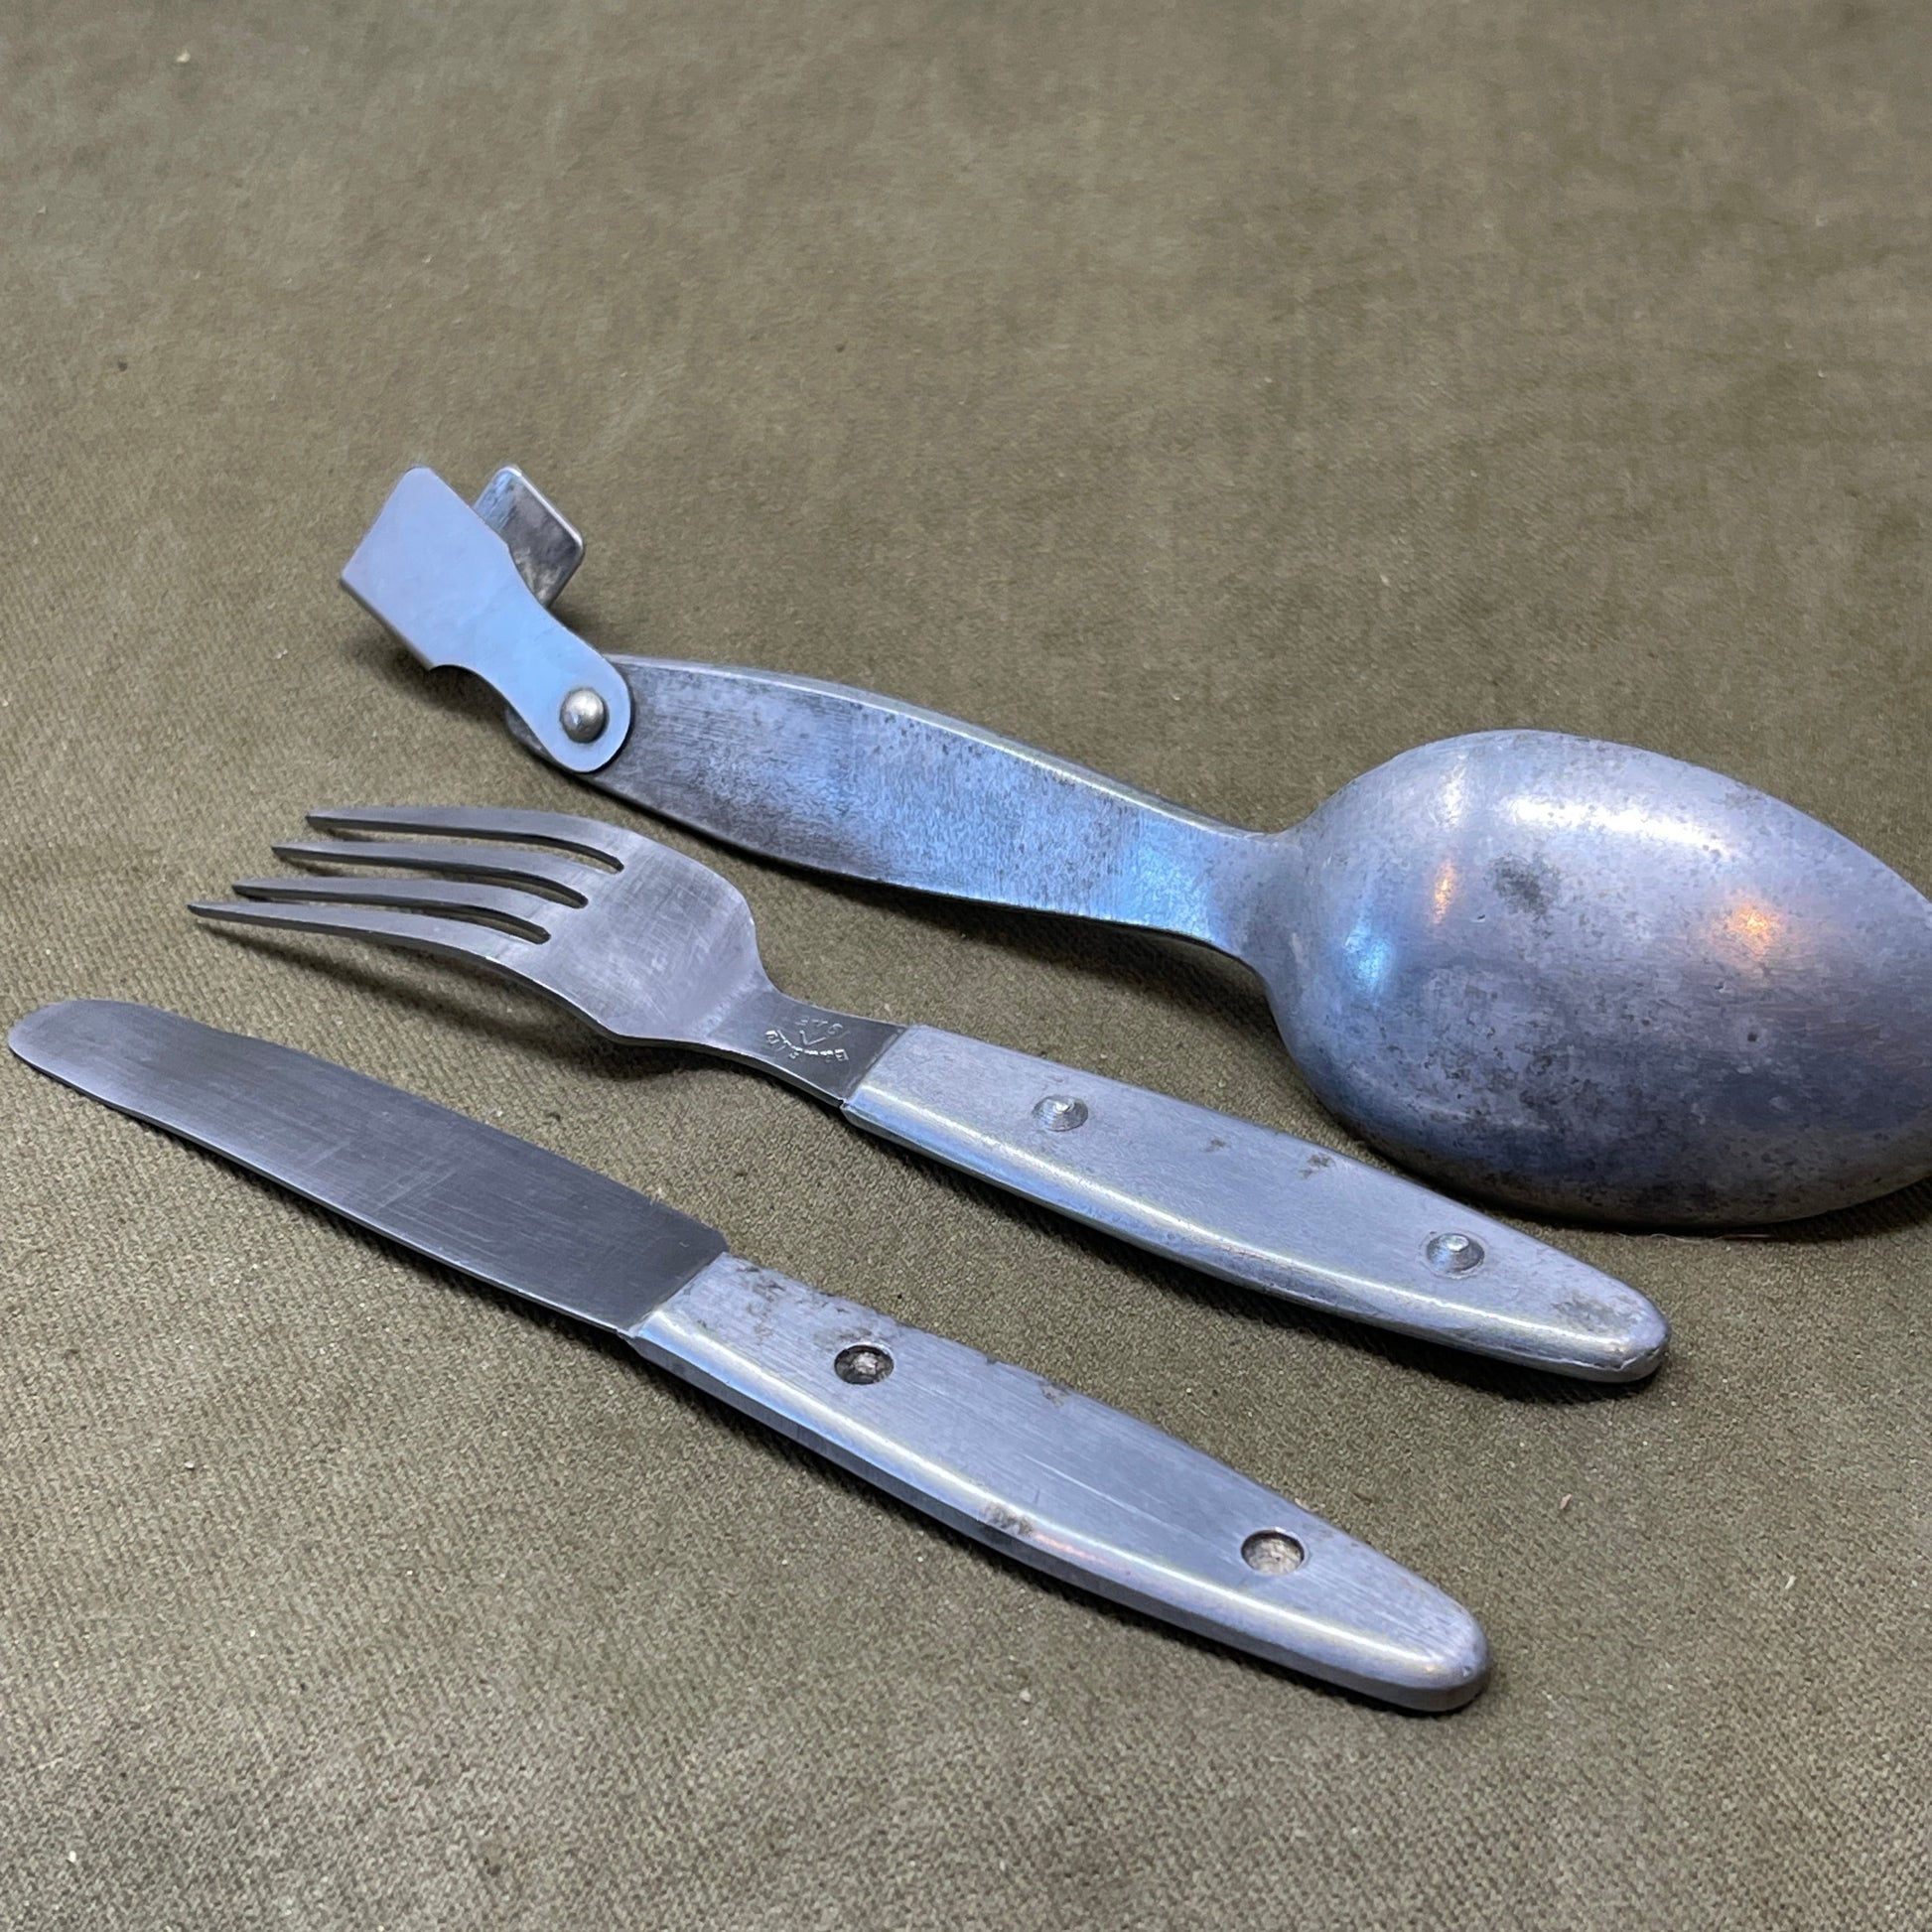  Knife, fork, and Spoon set dated 1945 Compactium